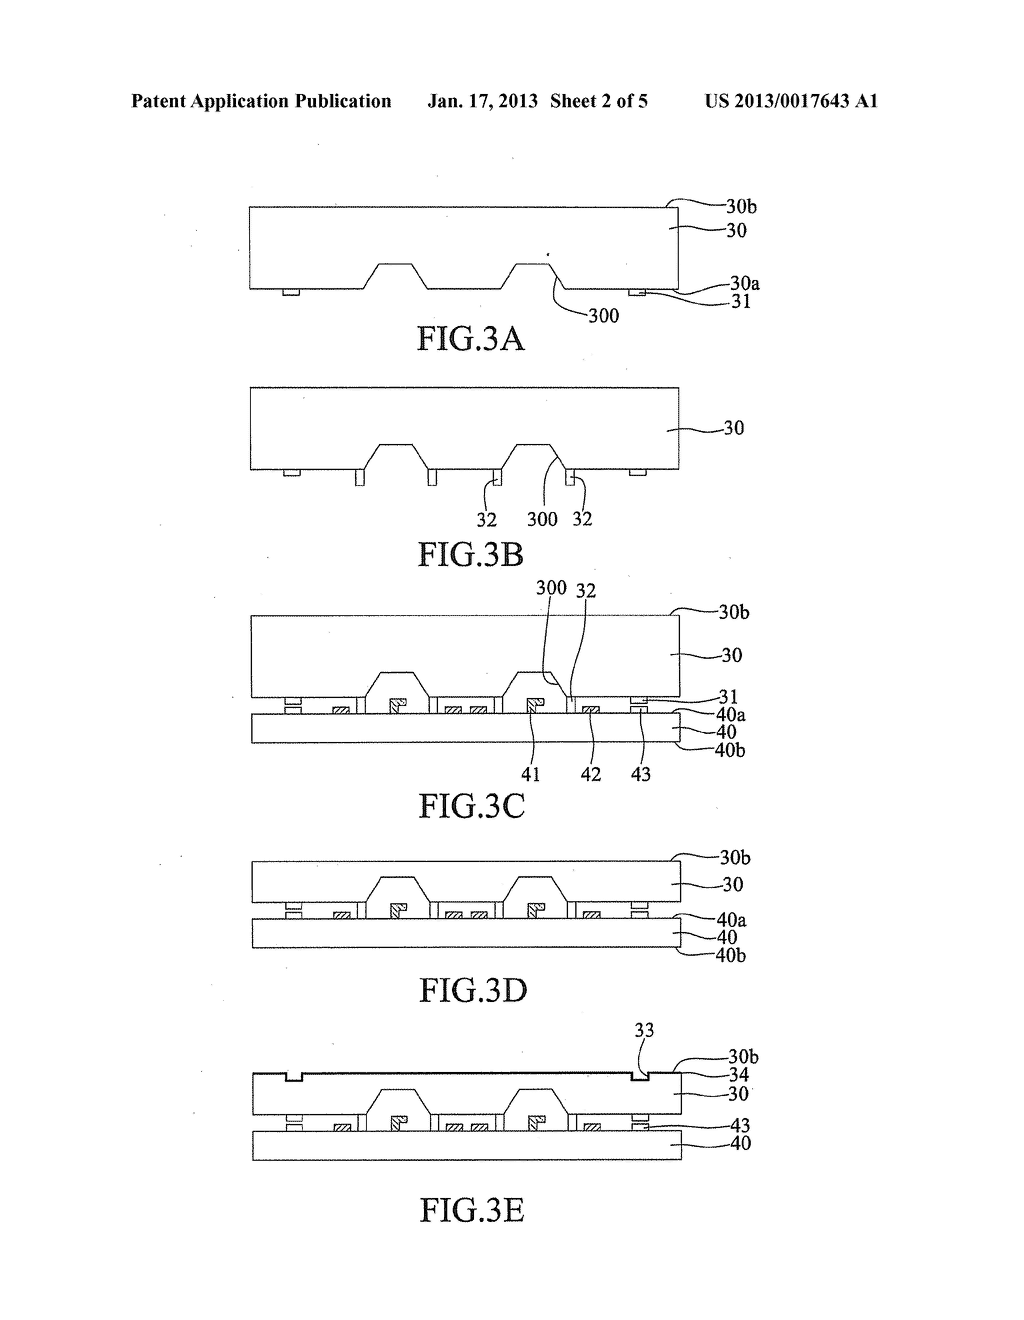 METHOD FOR FABRICATING PACKAGE STRUCTURE HAVING MEMS ELEMENTSAANM LIN; Chen-HanAACI Taichung HsienAACO TWAAGP LIN; Chen-Han Taichung Hsien TWAANM CHANG; Hong-DaAACI Taichung HsienAACO TWAAGP CHANG; Hong-Da Taichung Hsien TWAANM LIU; Cheng-HsiangAACI Taichung HsienAACO TWAAGP LIU; Cheng-Hsiang Taichung Hsien TWAANM LIAO; Hsin-YiAACI Taichung HsienAACO TWAAGP LIAO; Hsin-Yi Taichung Hsien TWAANM CHIU; Shih-KuangAACI Taichung HsienAACO TWAAGP CHIU; Shih-Kuang Taichung Hsien TW - diagram, schematic, and image 03